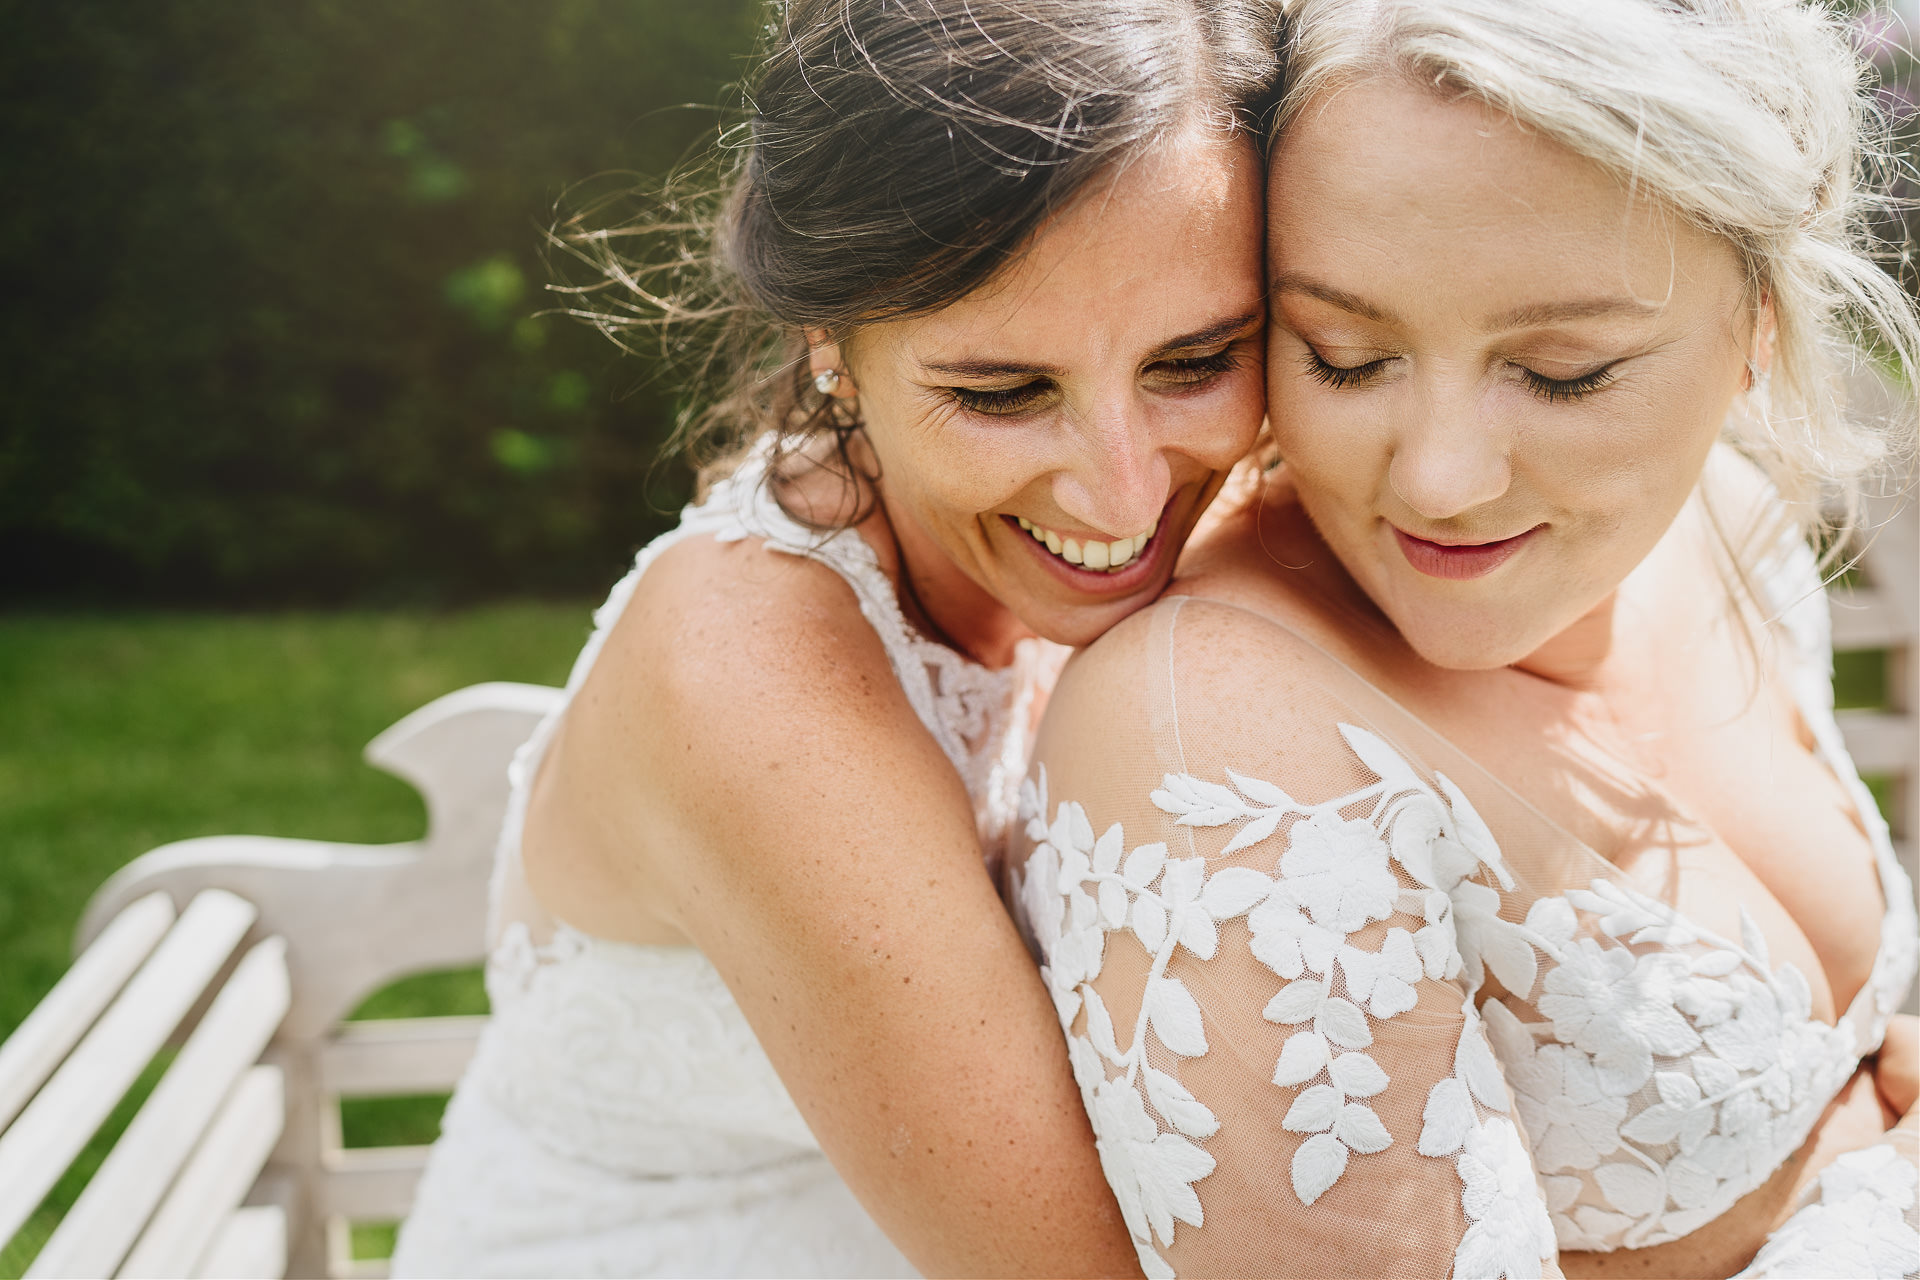 Two brides cuddling together on a bench in the sunshine